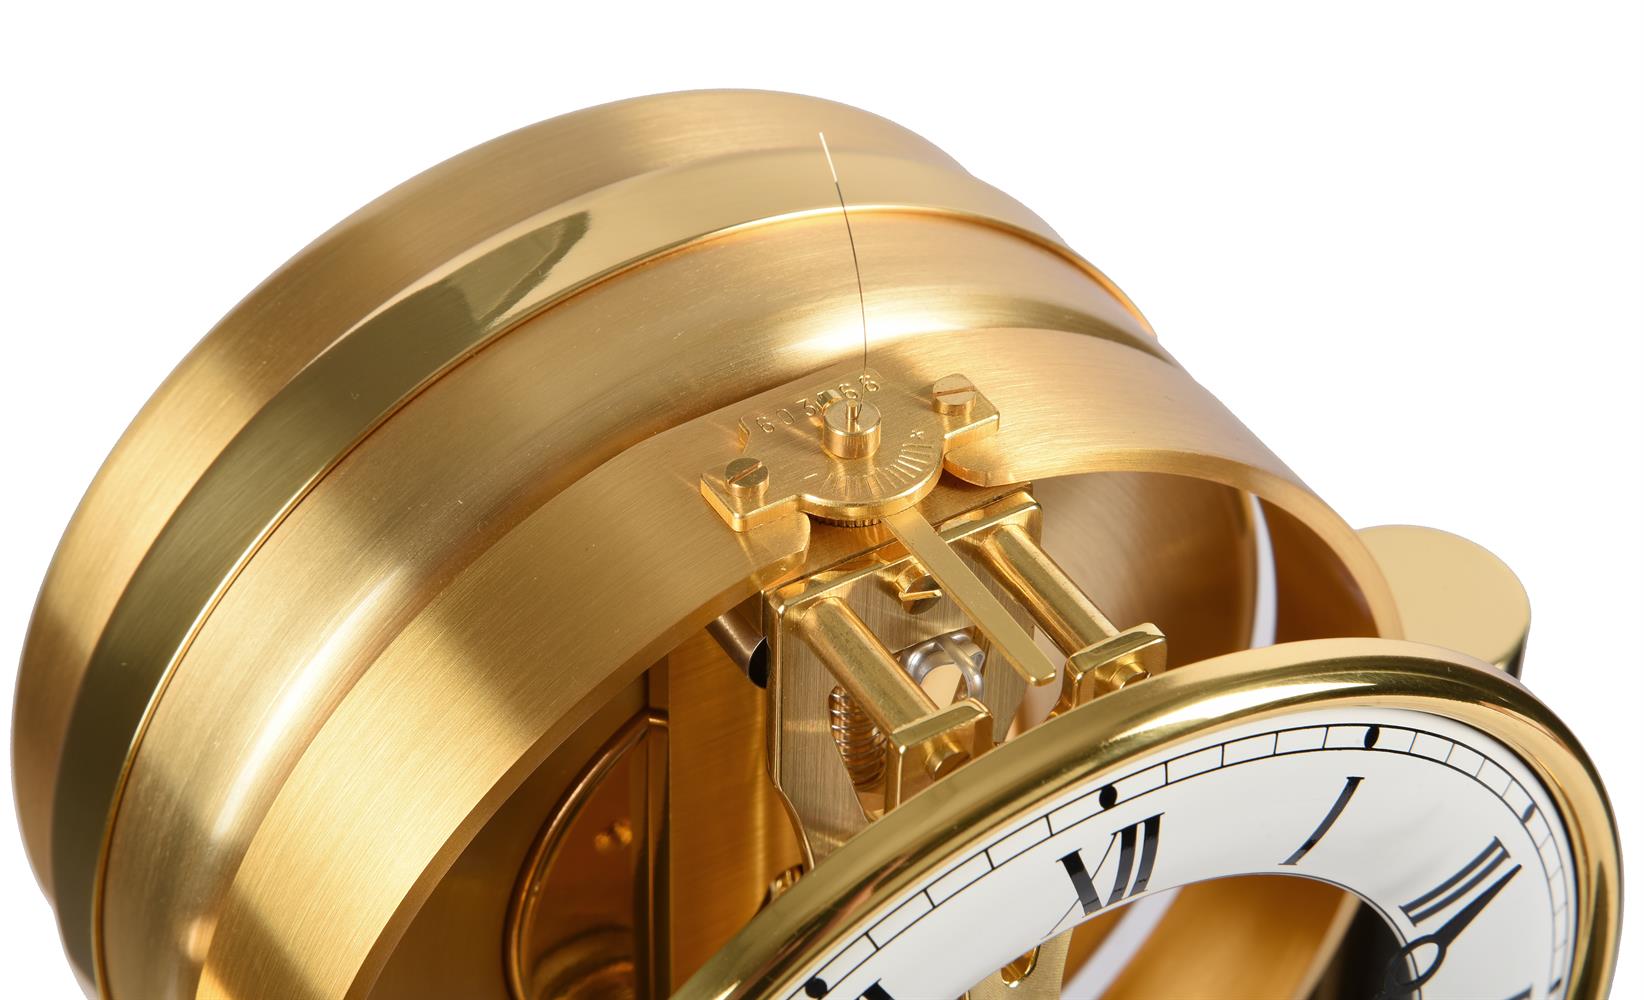 A GILT AND OXIDISED BRASS 150 YEAR ANNIVERSARY ATMOS TIMEPIECE - Image 4 of 7